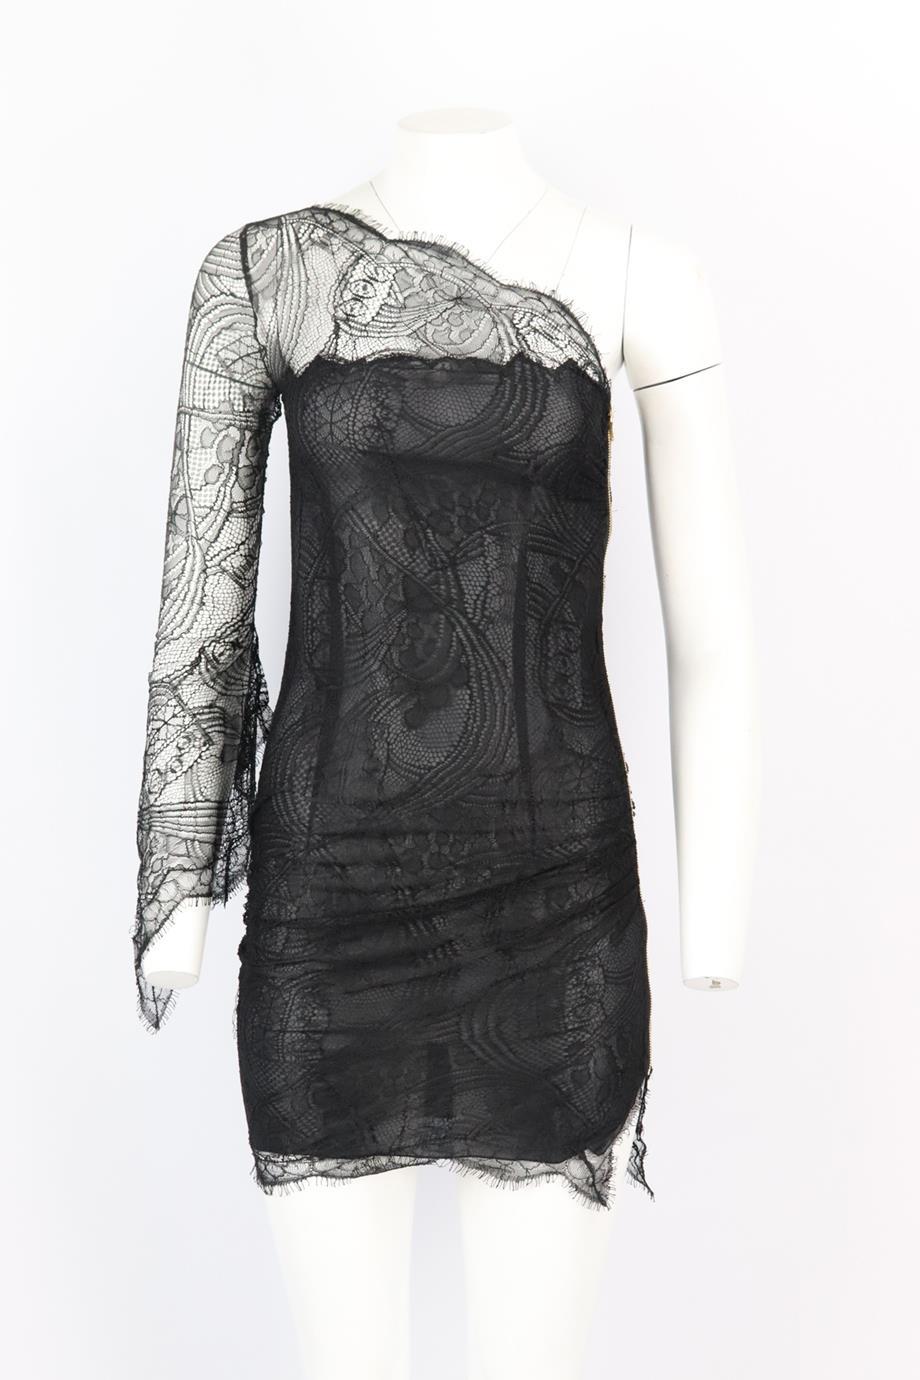 Emilio Pucci one shoulder lace mini dress. Black. Long sleeve, one shoulder. Zip fastening at side. Size: IT 38 (UK 6, US 2, FR 34). Bust: 32 in. Waist: 29 in. Hips: 35 in. Length: 33 in. Very good condition - No sign of wear; see pictures.